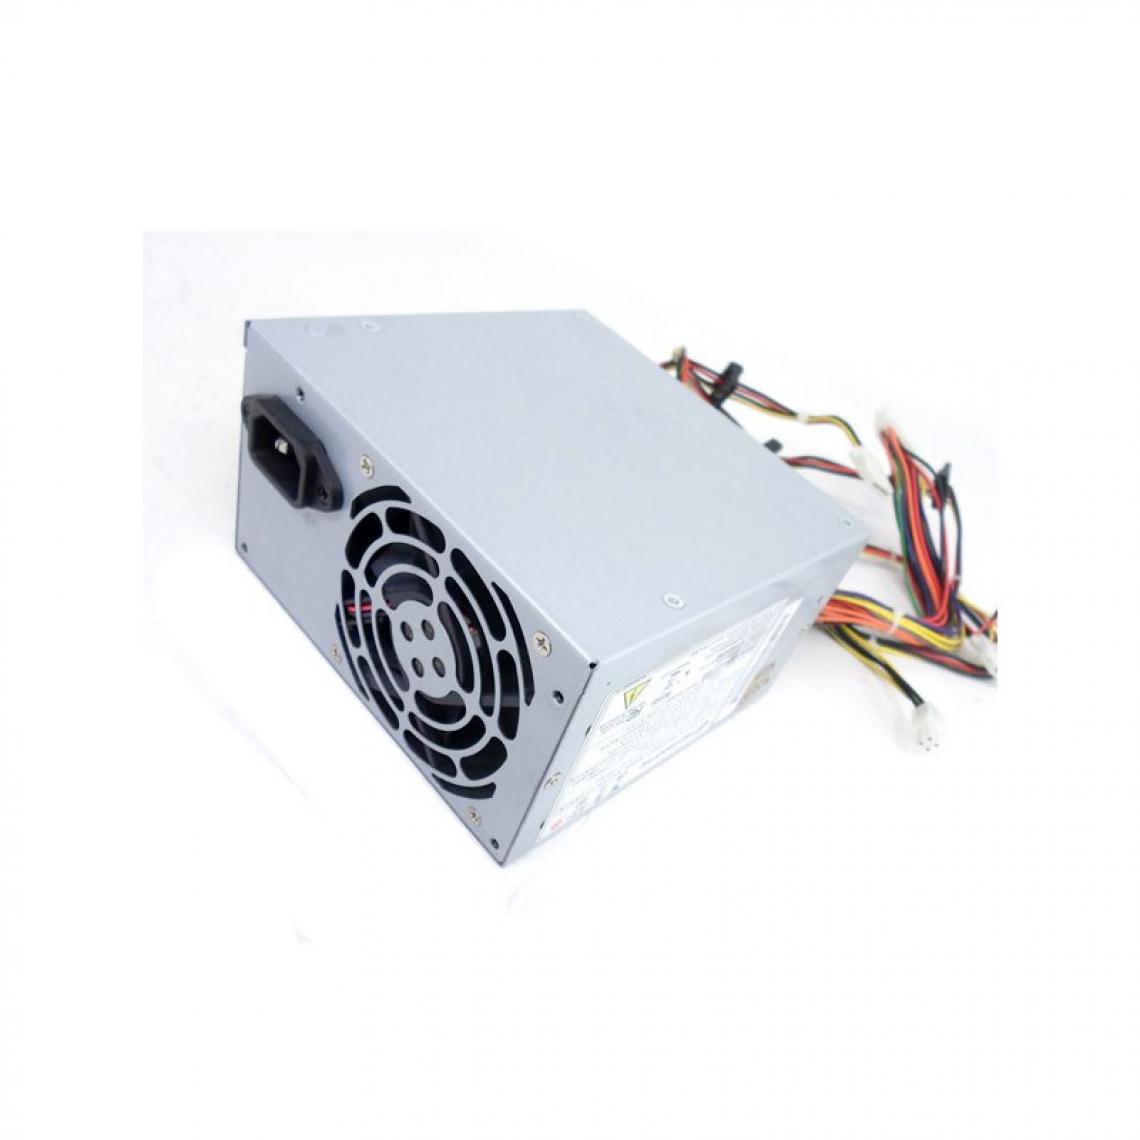 Fsp Group - Alimentation PC FSP Group FSP300-60EP(1) 9PA300AX08 ATX 300 W - Alimentation modulaire